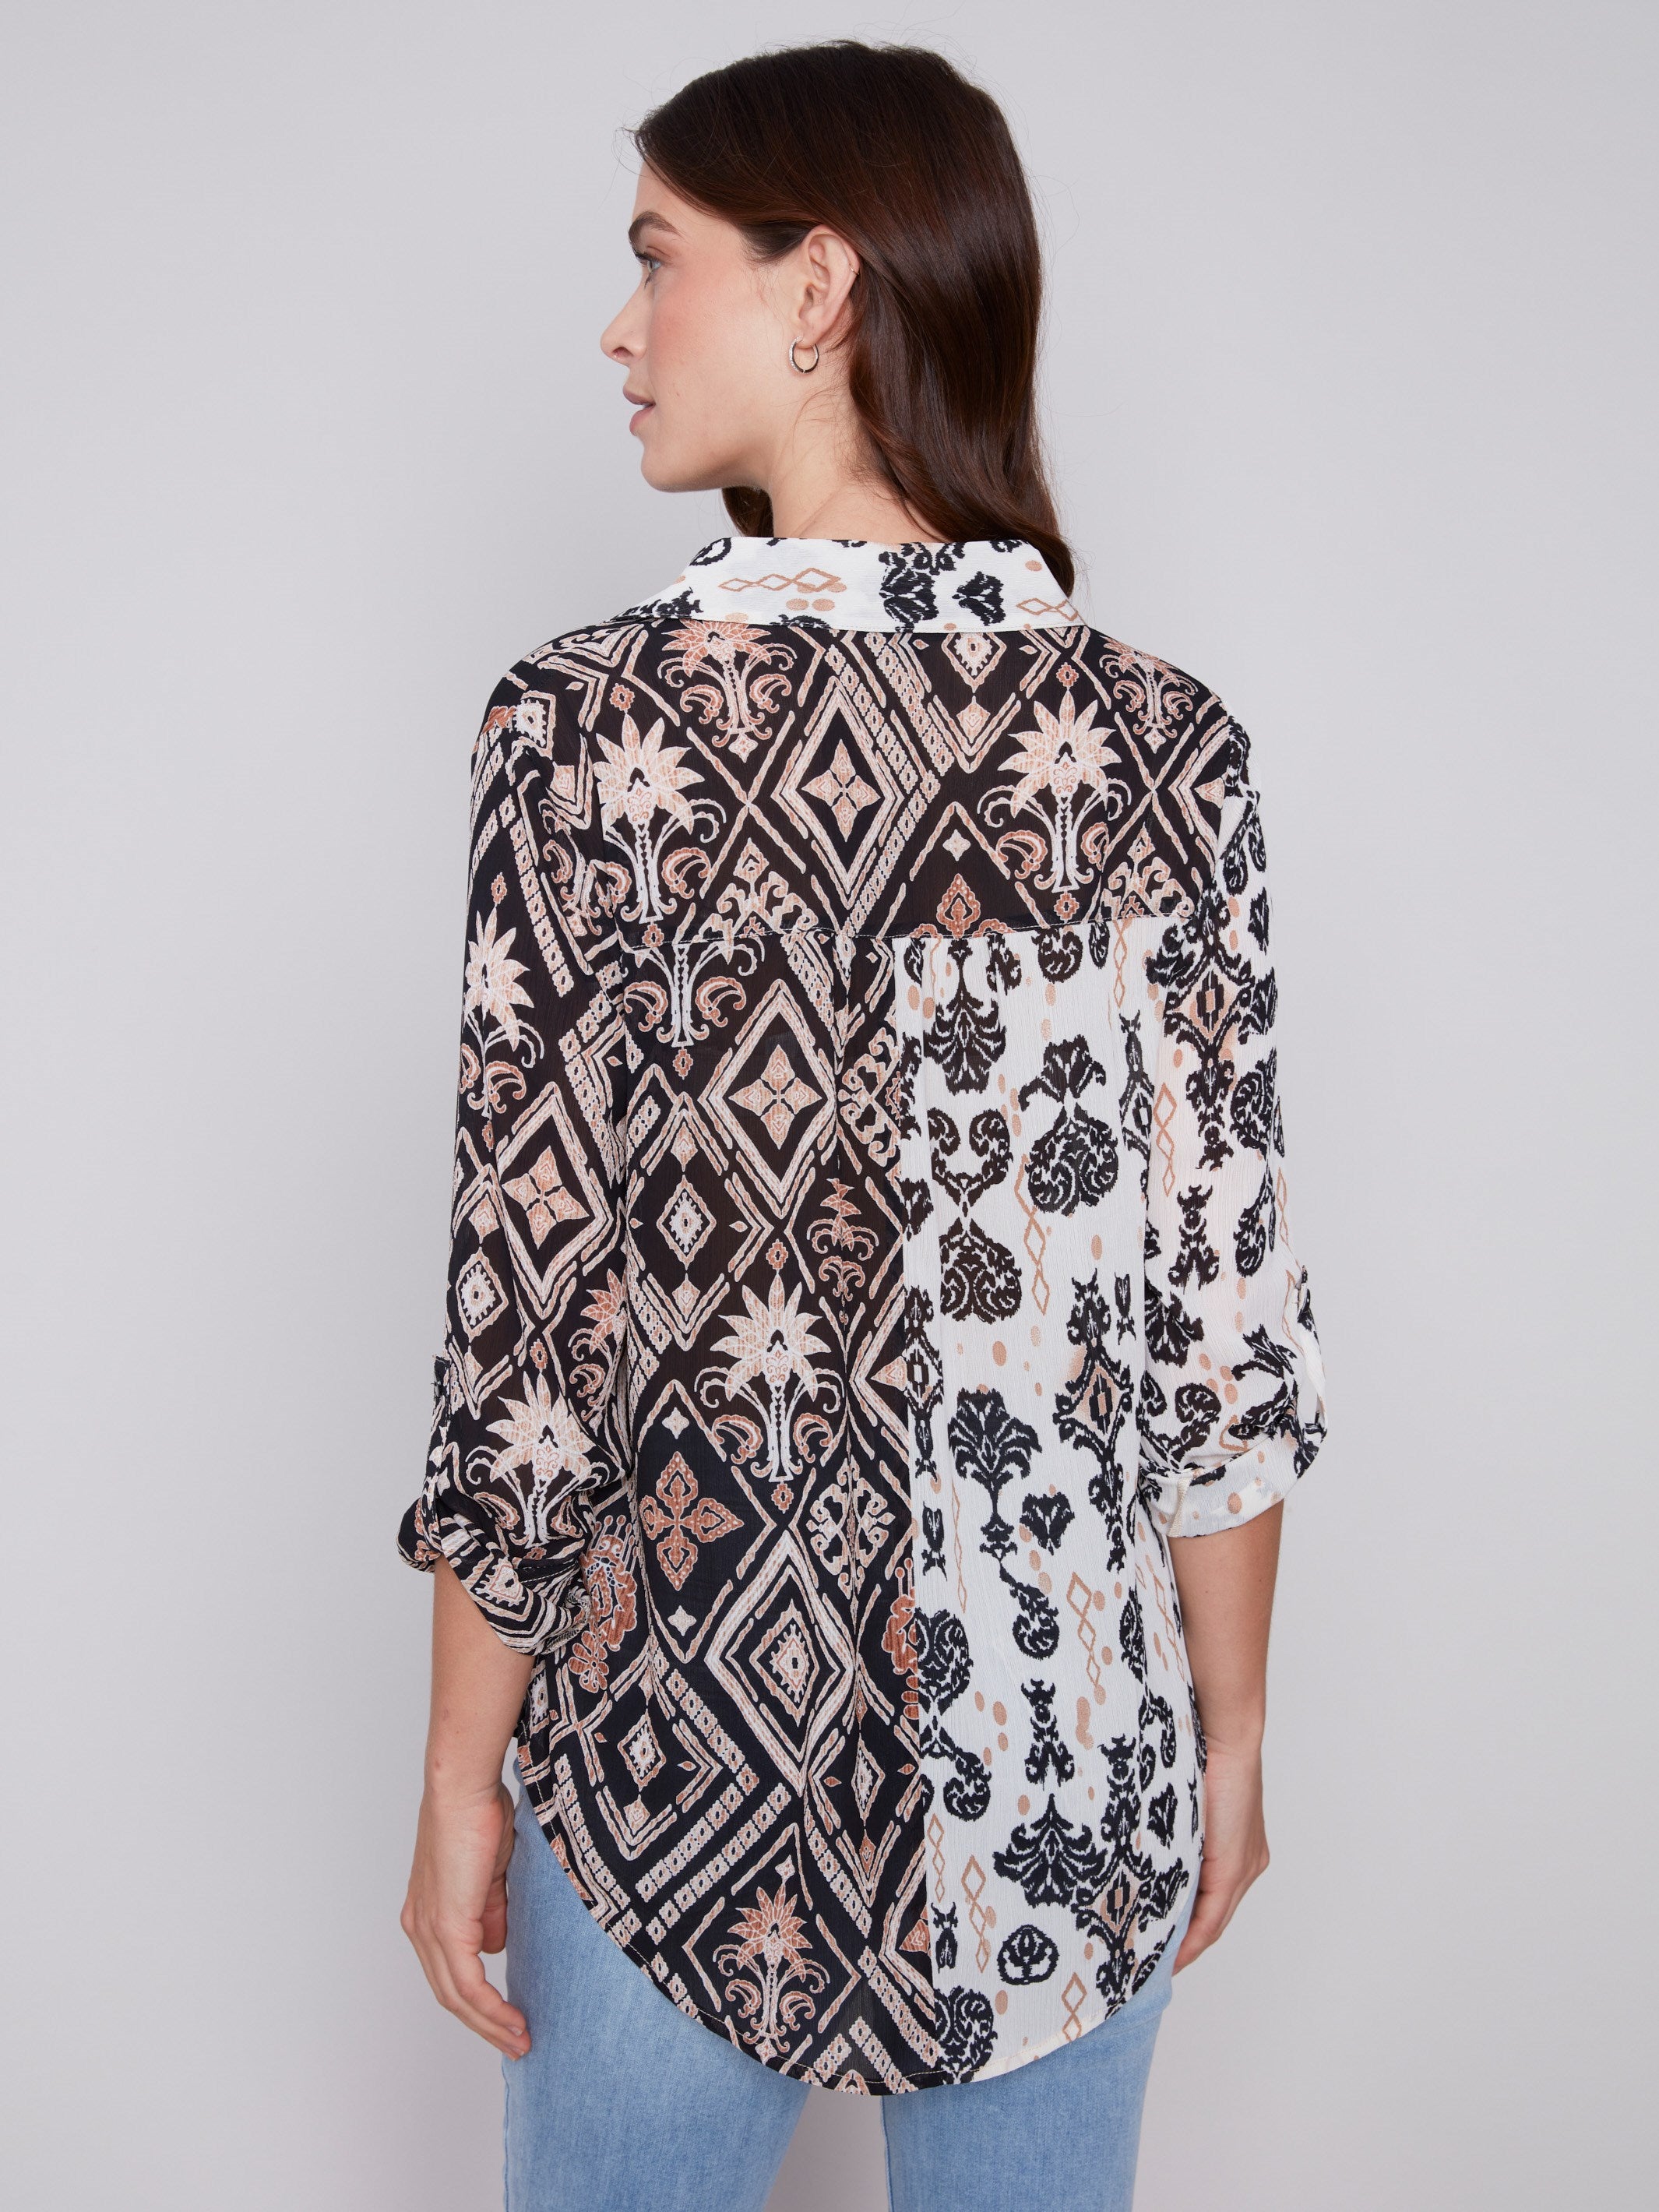 Printed Crinkle Georgette Blouse - Damask - Charlie B Collection Canada - Image 2